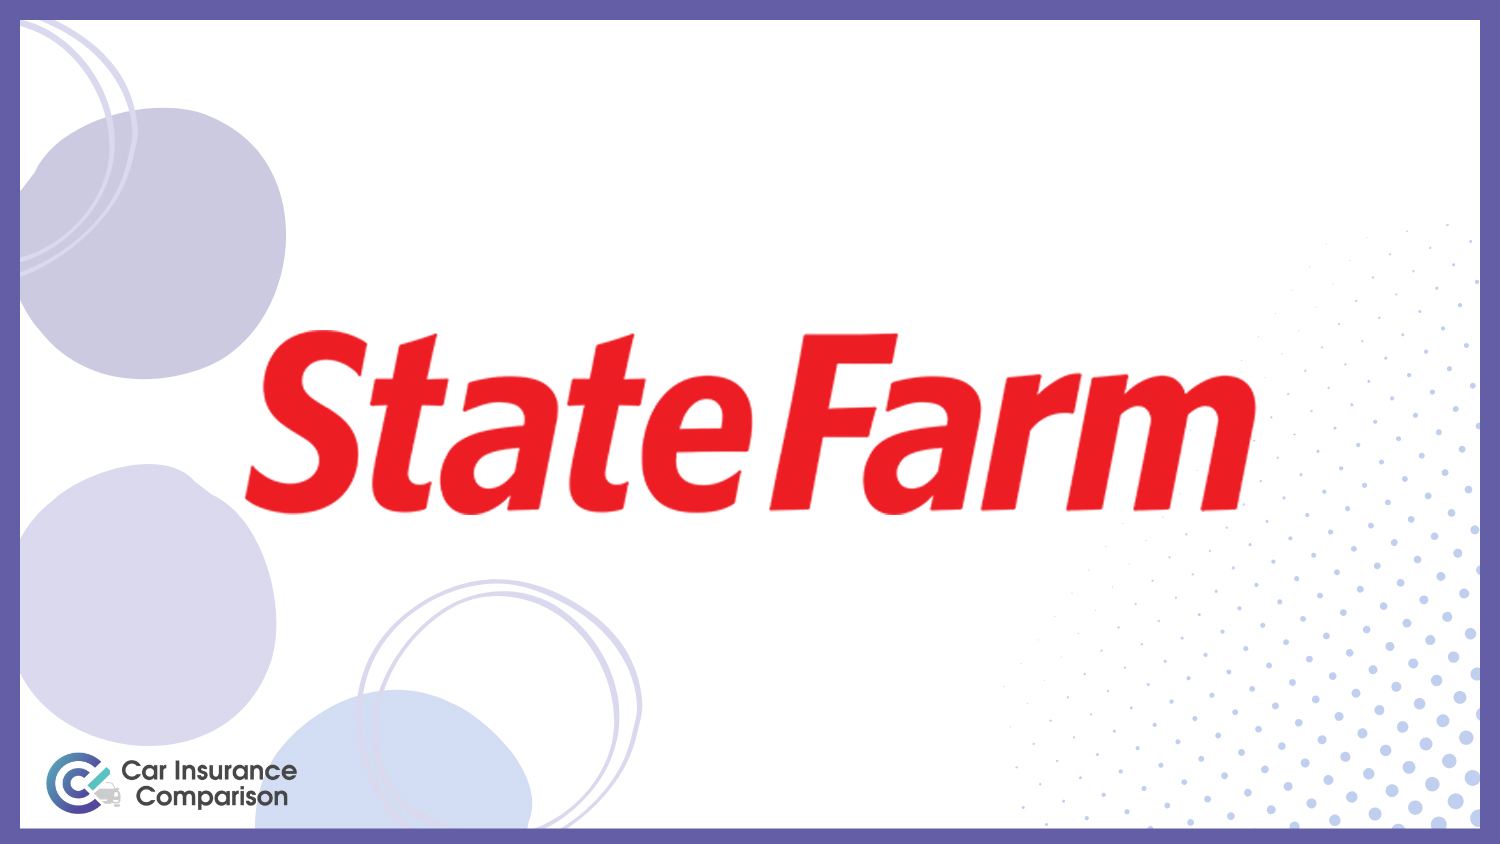 State Farm: Compare Car Insurance Rates for Inexperienced Drivers